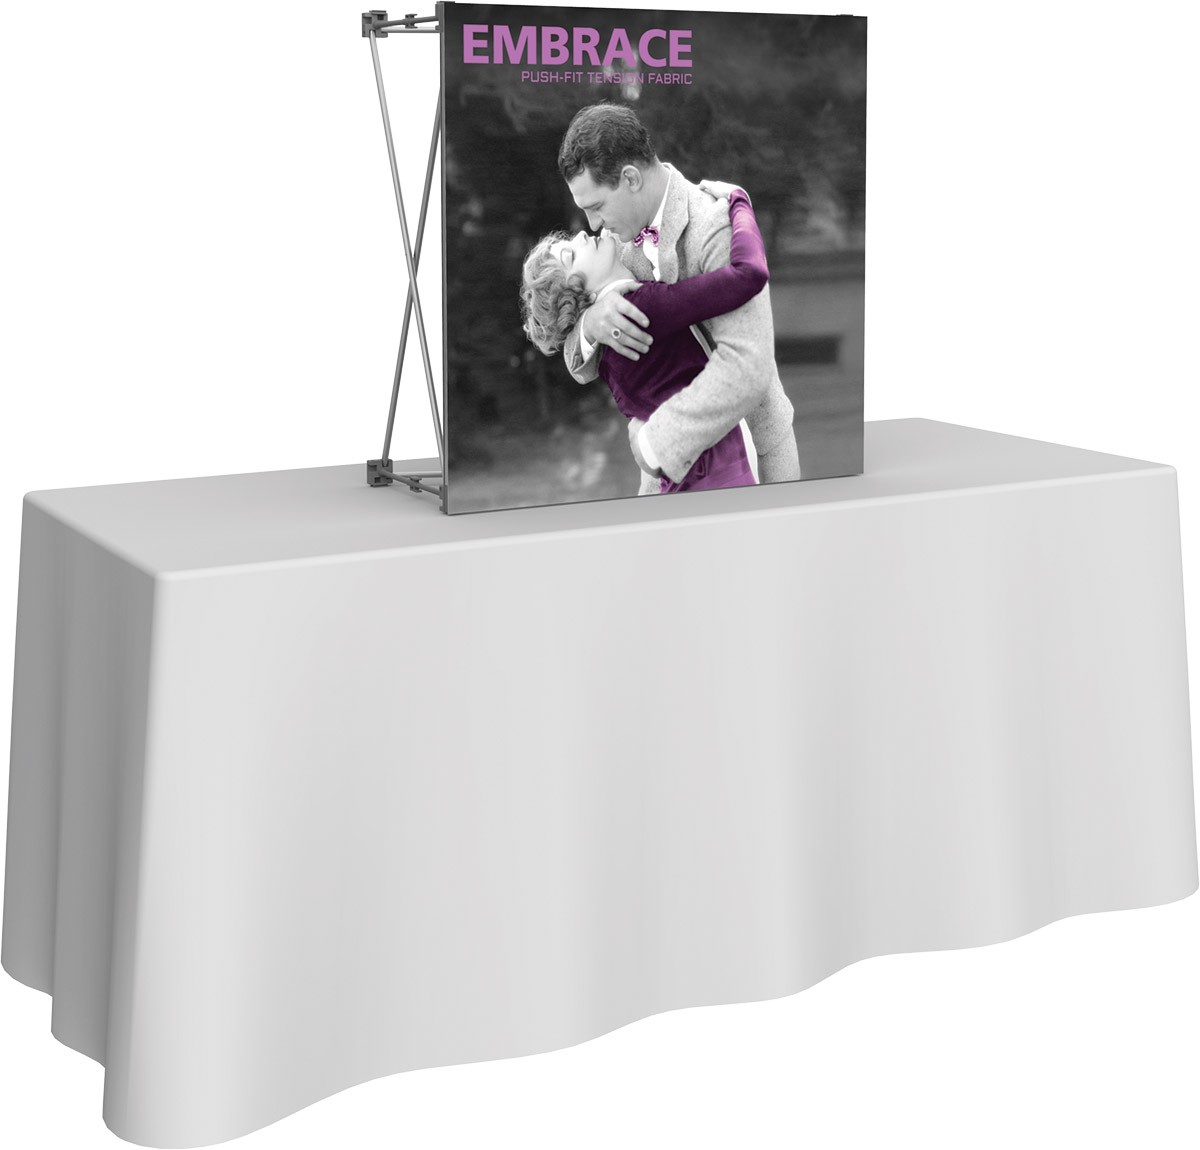 Embrace 2.5' Table Top Display